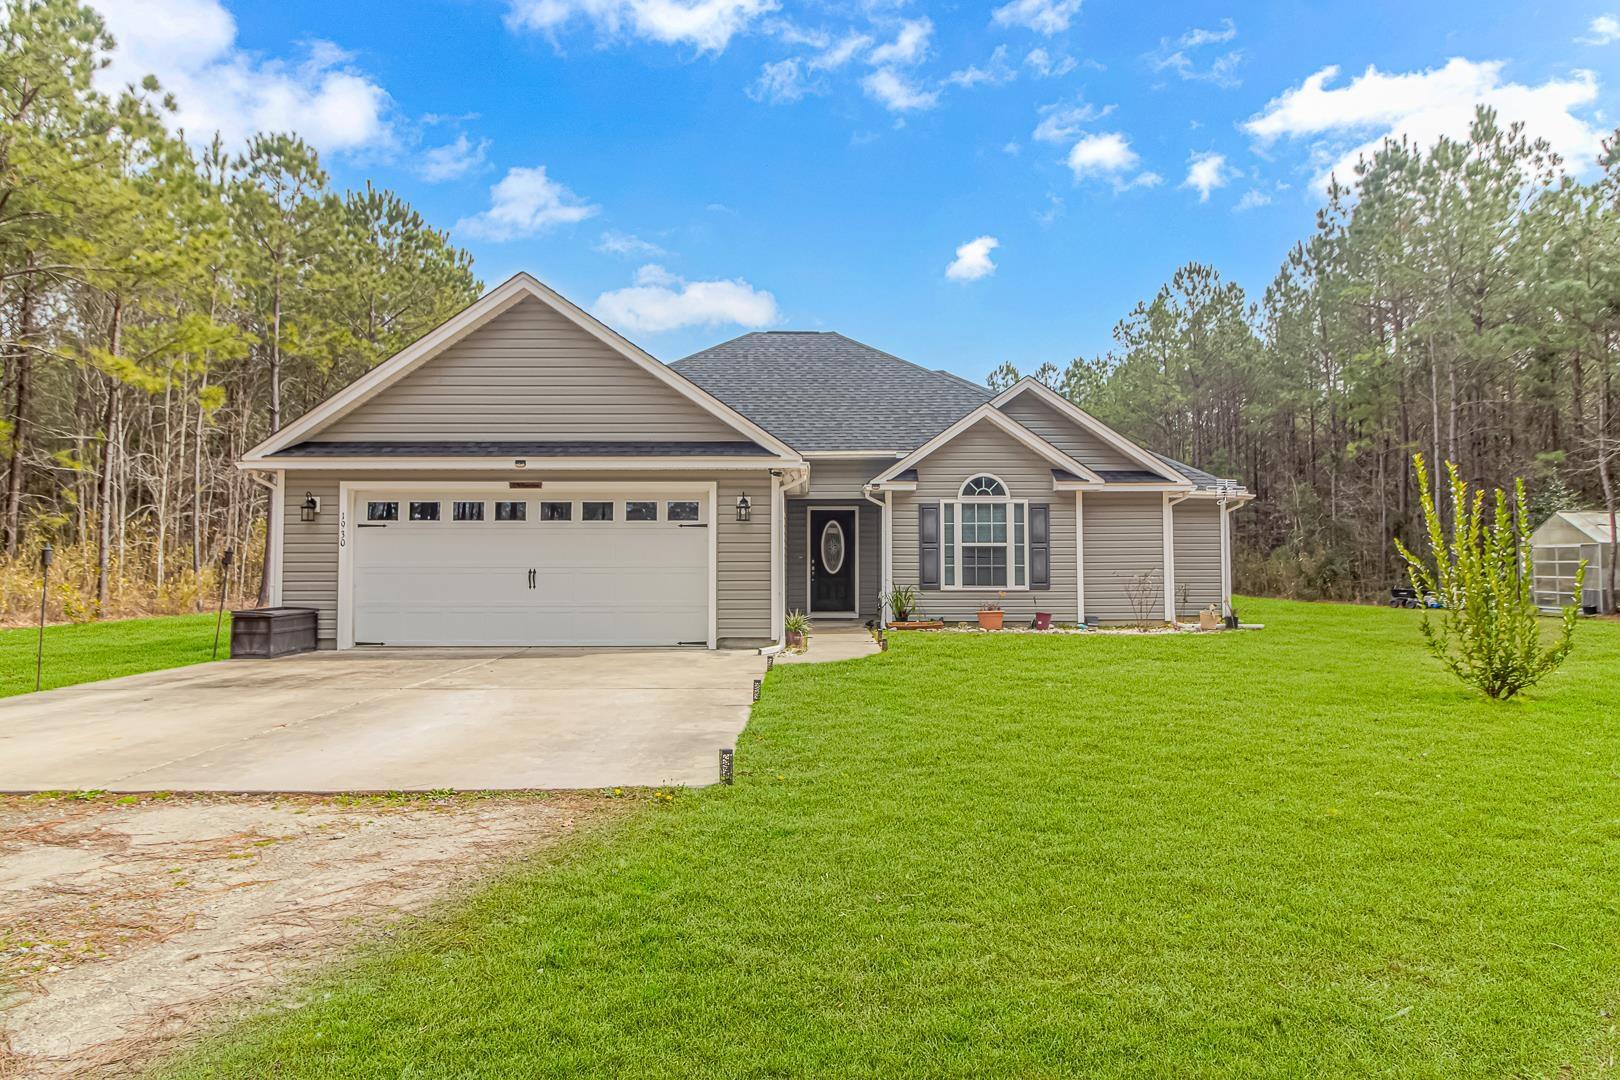 Photo one of 1930 W Homewood Rd. Conway SC 29526 | MLS 2403579